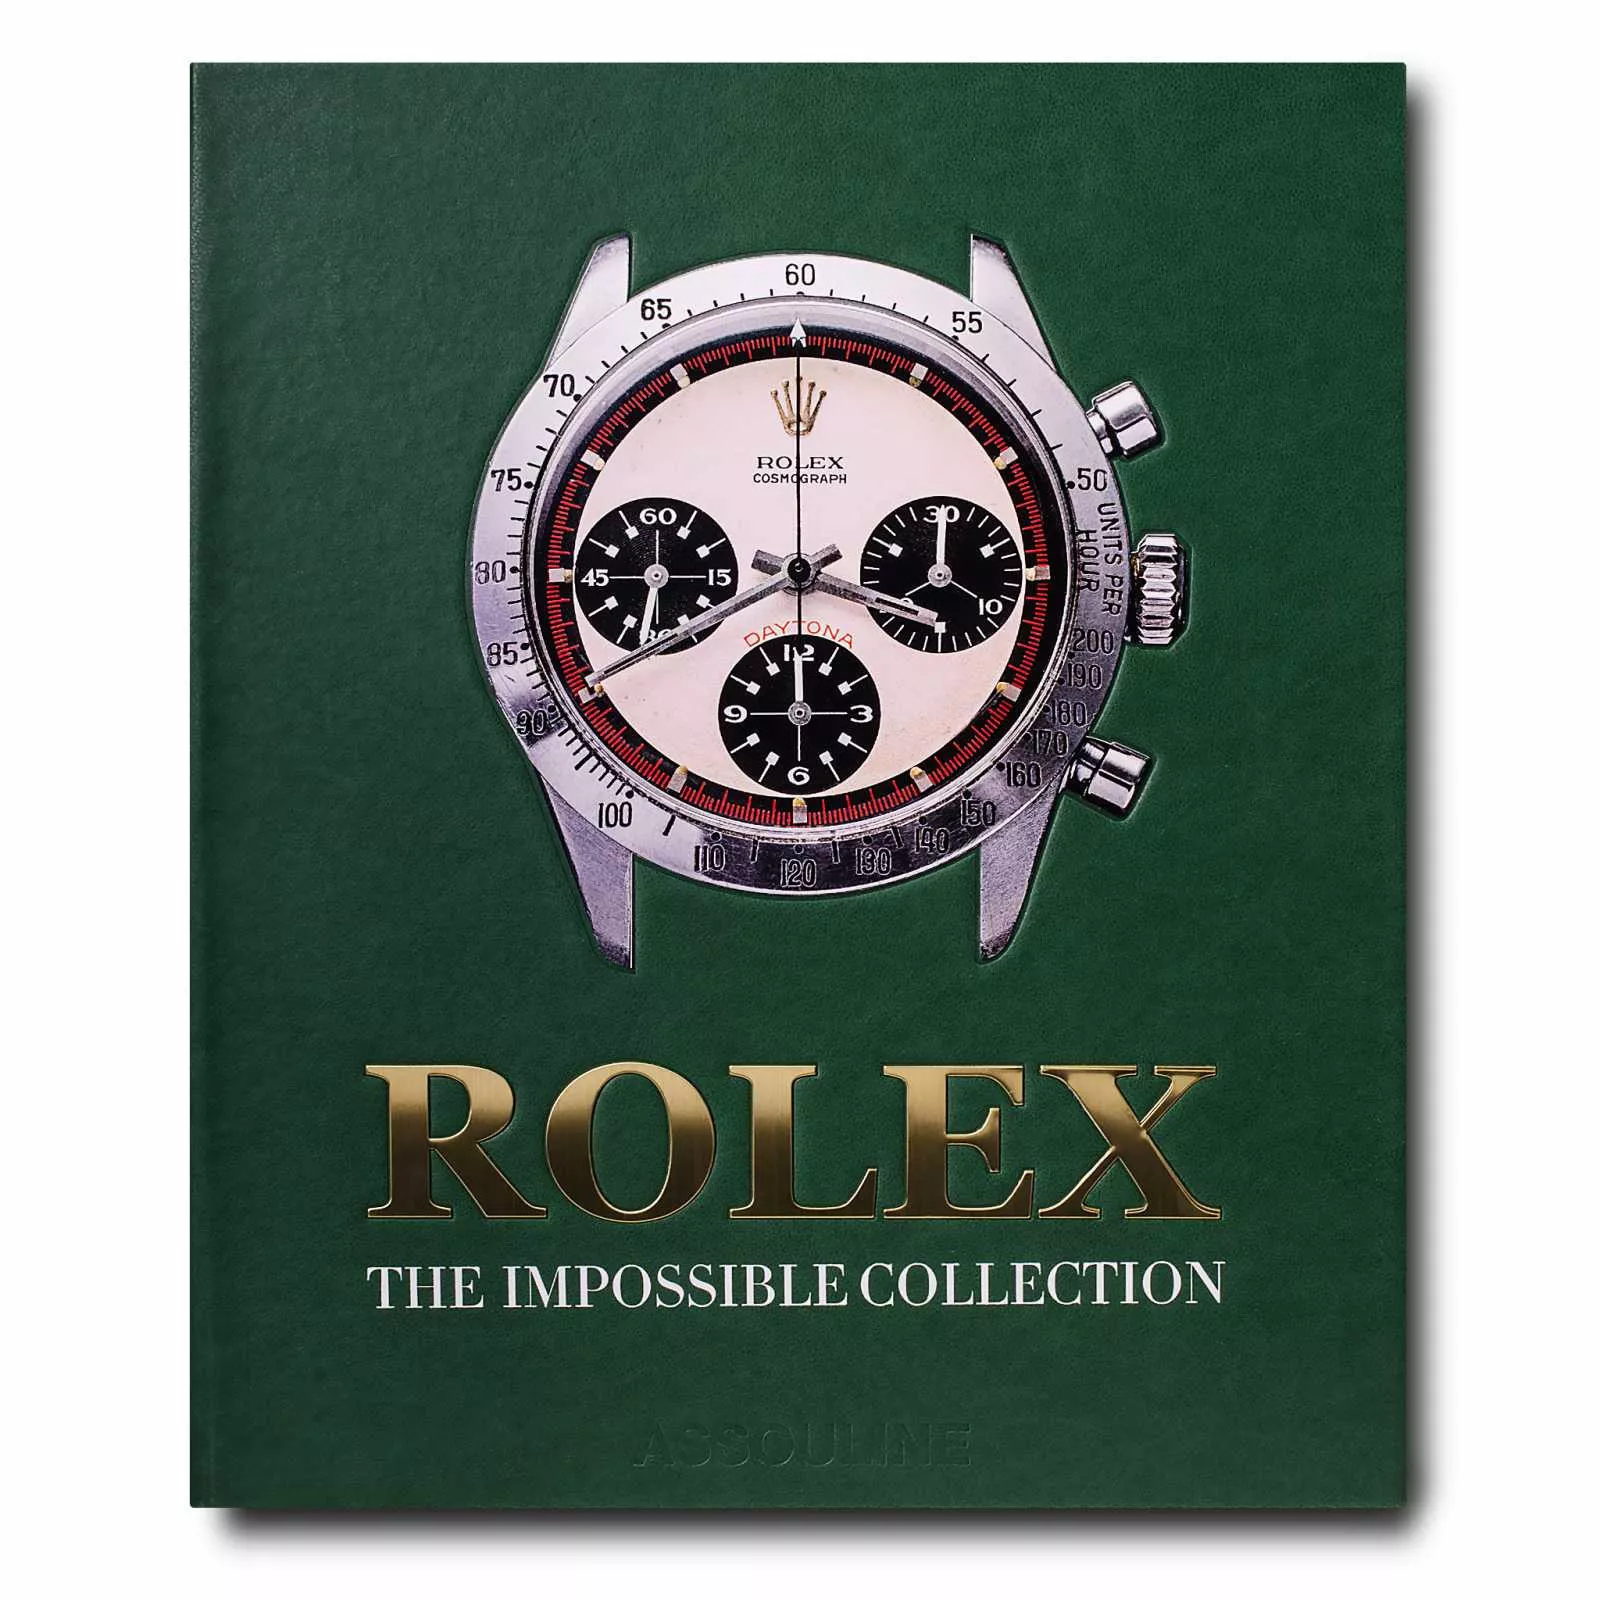 Книга "Rolex:The Impossible Collection" Assouline Collection (9781614287209) - Фото nav 1